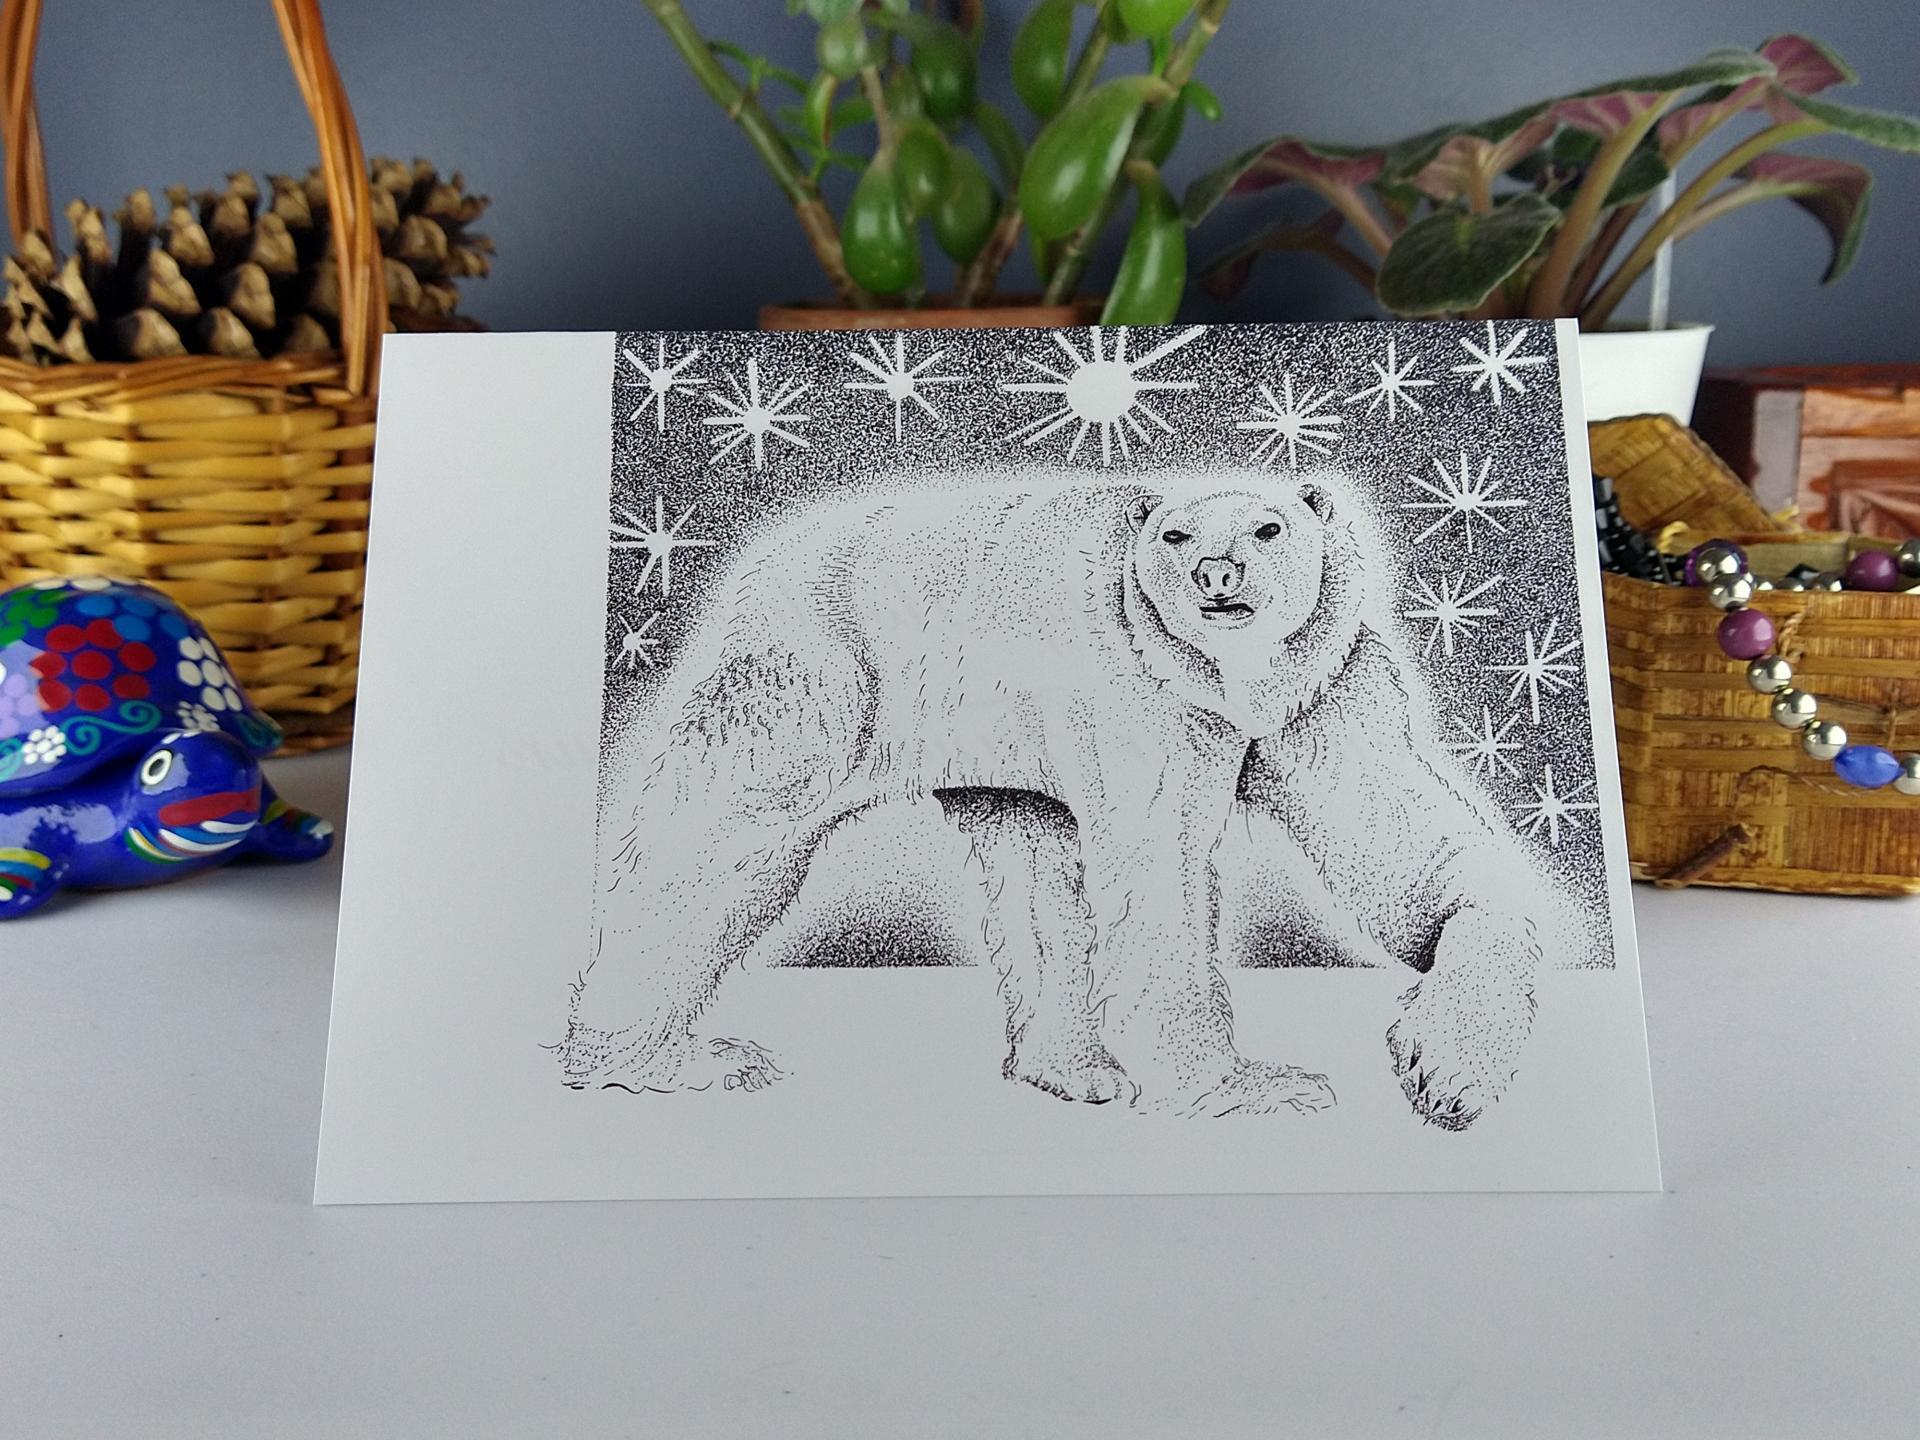 Polar Bear 5x7 Note/Blank Greeting Cards from Original Pen and Ink Drawing, w/ Envelopes